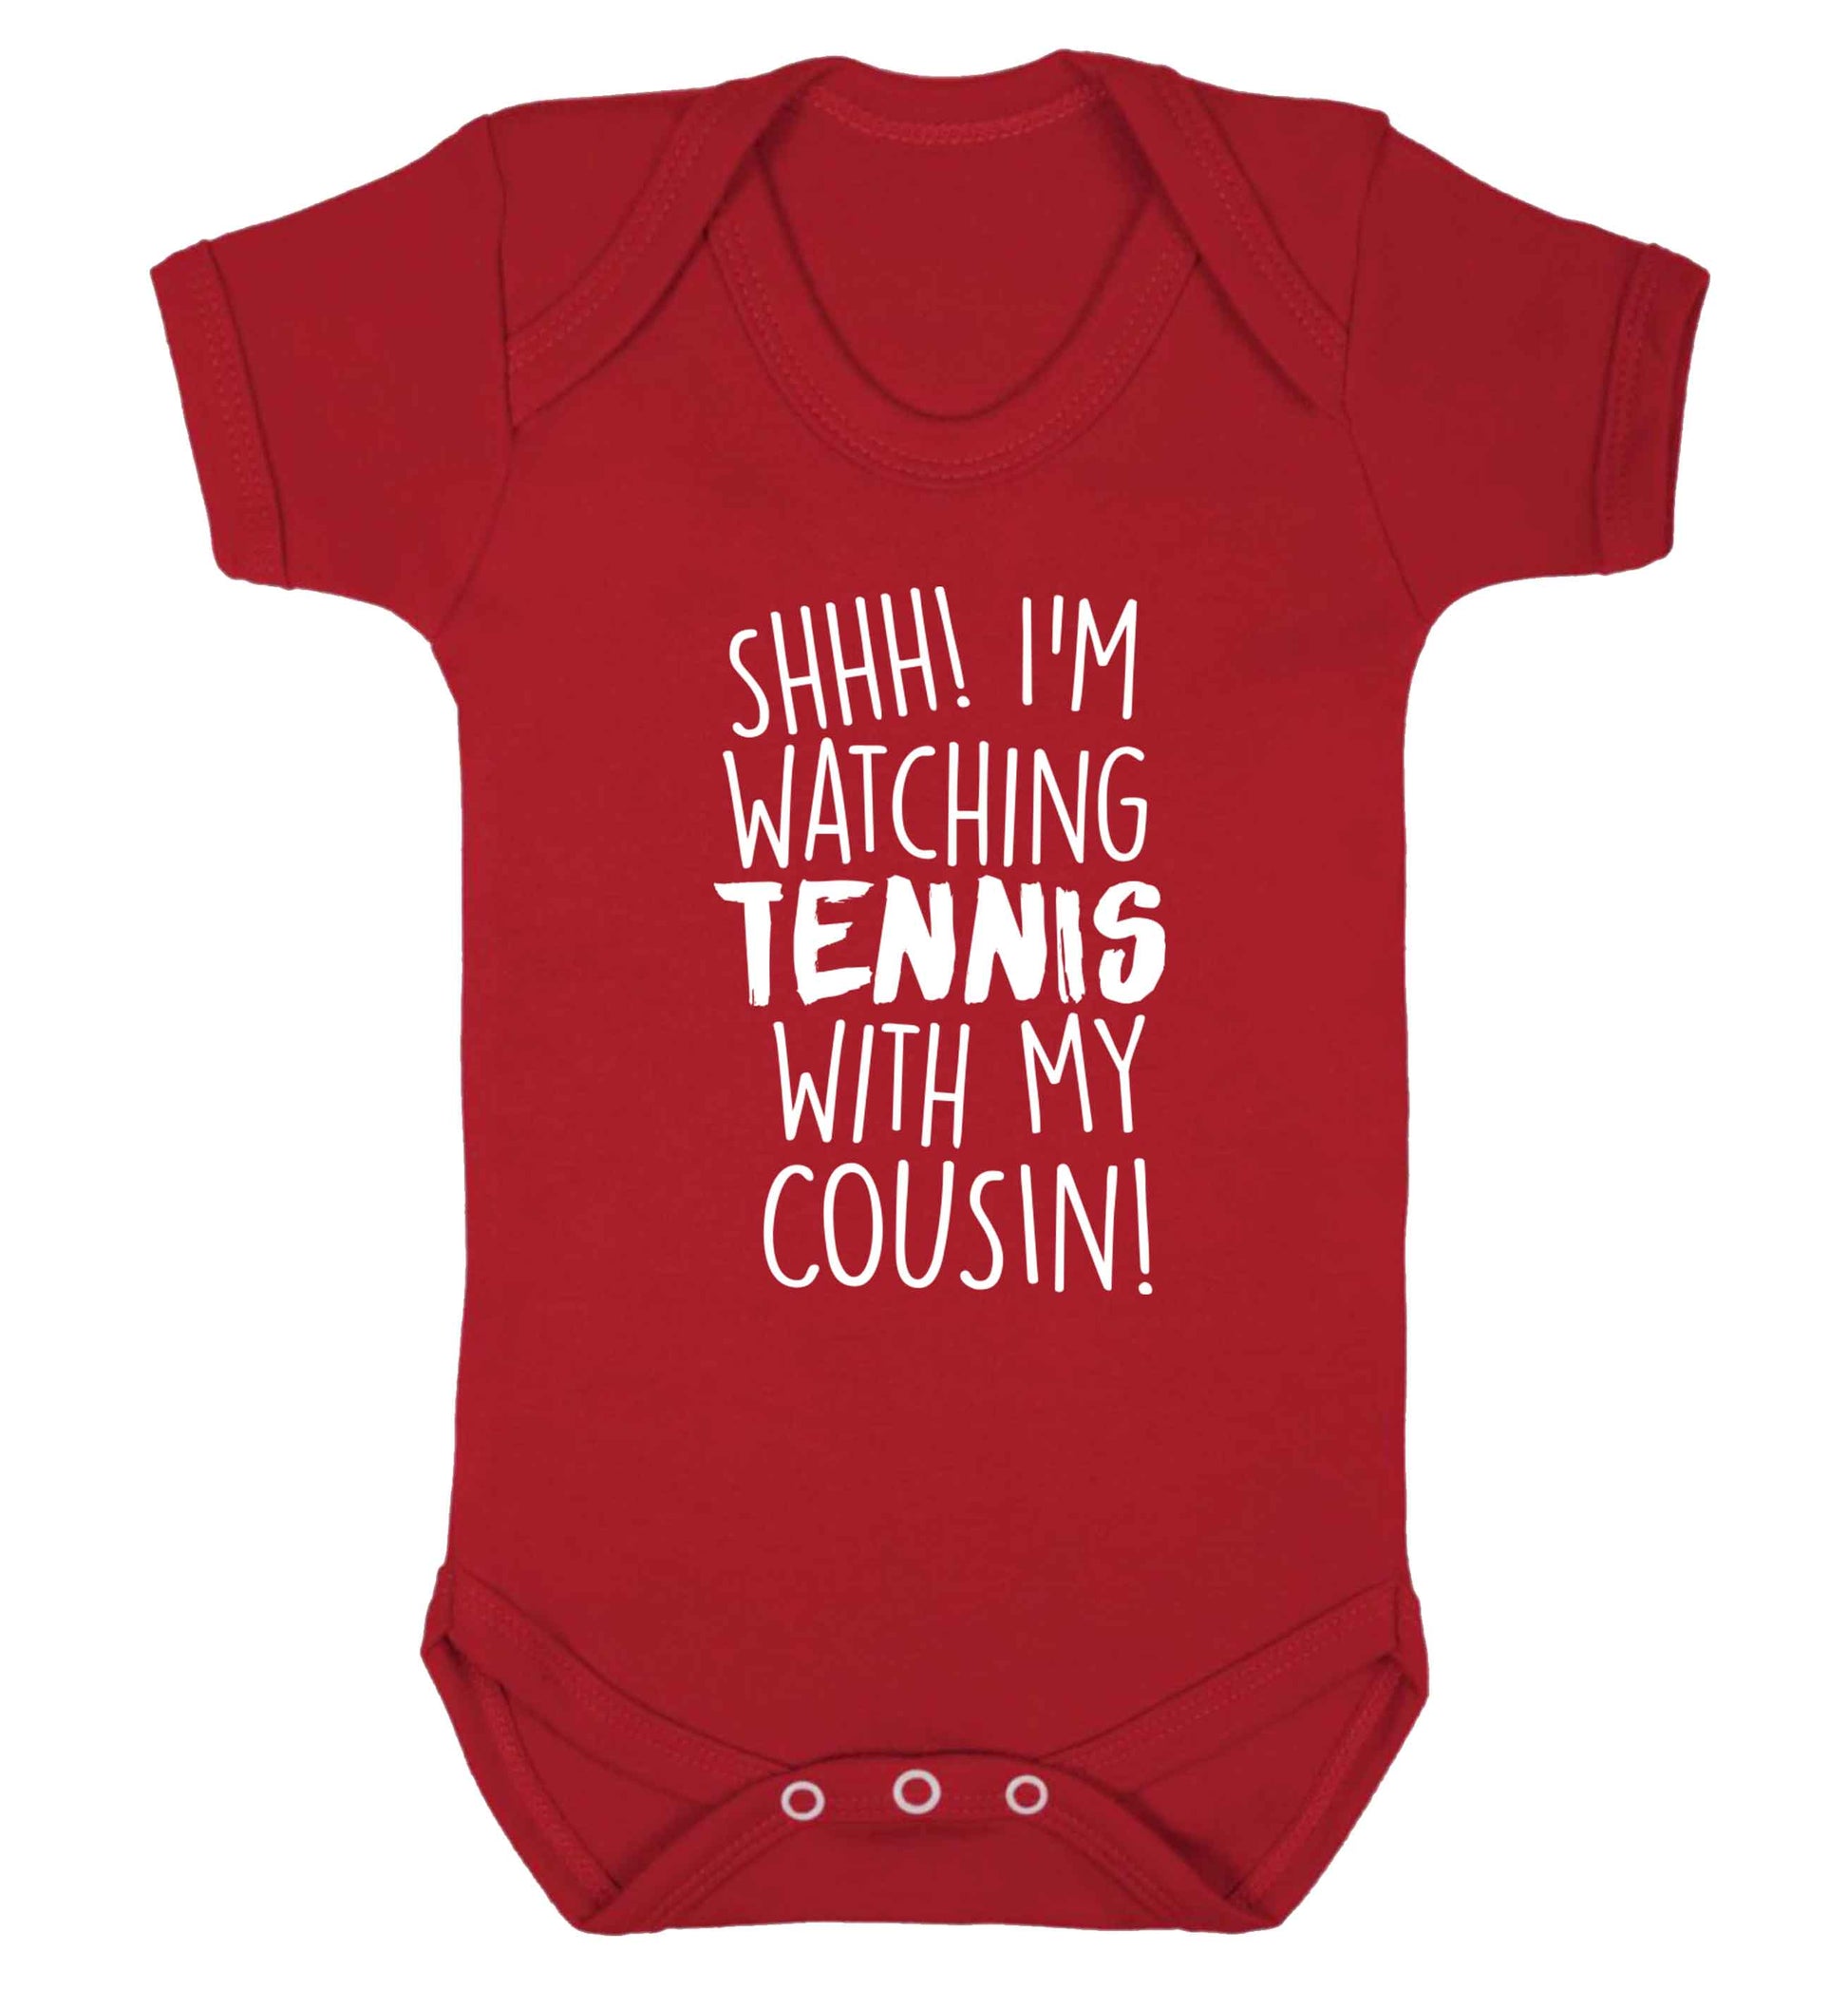 Shh! I'm watching tennis with my cousin! Baby Vest red 18-24 months